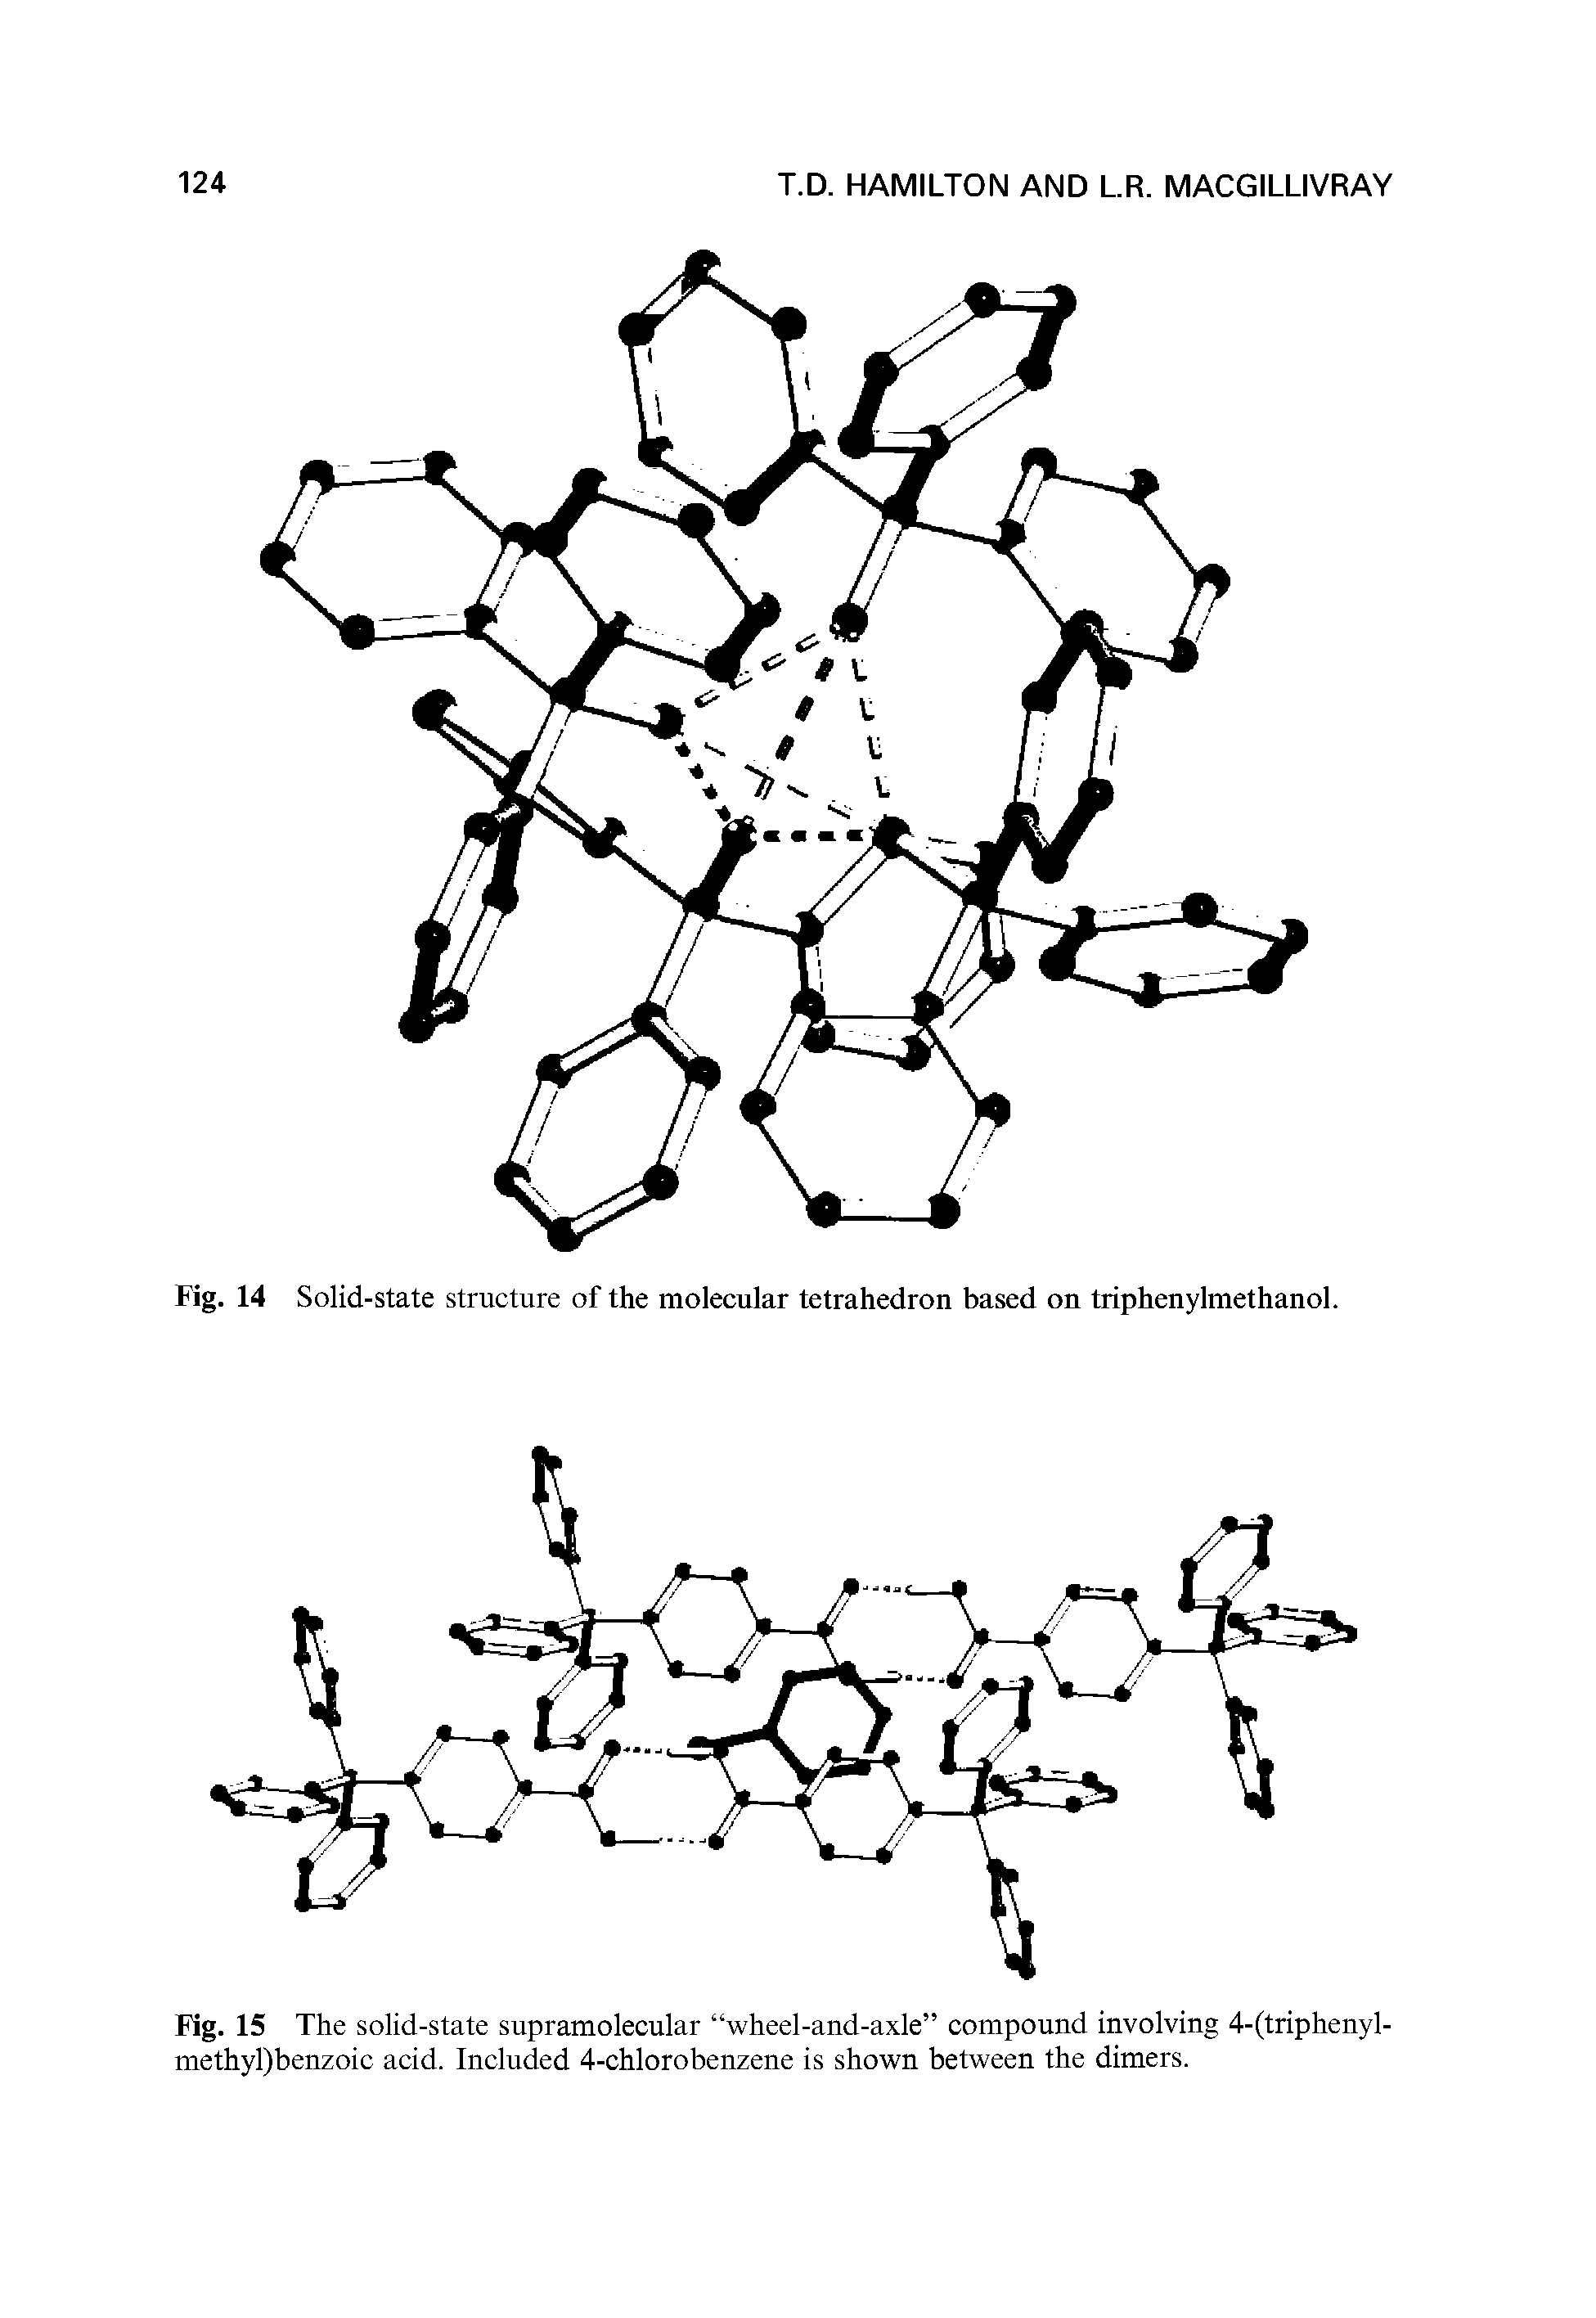 Fig. 15 The solid-state supramolecular wheel-and-axle compound involving 4-(triphenyl-methyl)benzoic acid. Included 4-chlorobenzene is shown between the dimers.